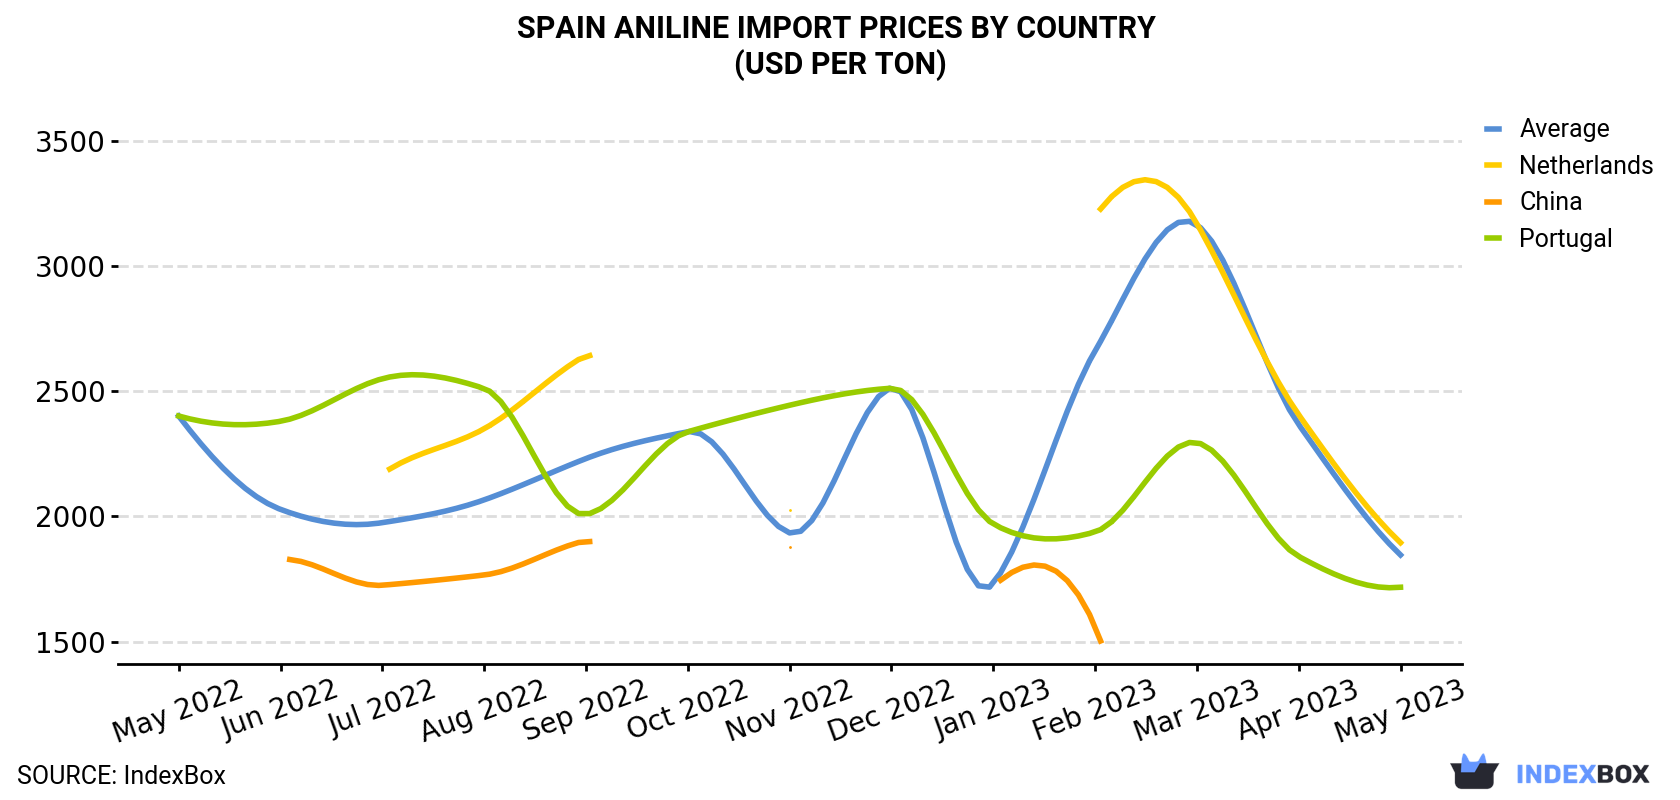 Spain Aniline Import Prices By Country (USD Per Ton)